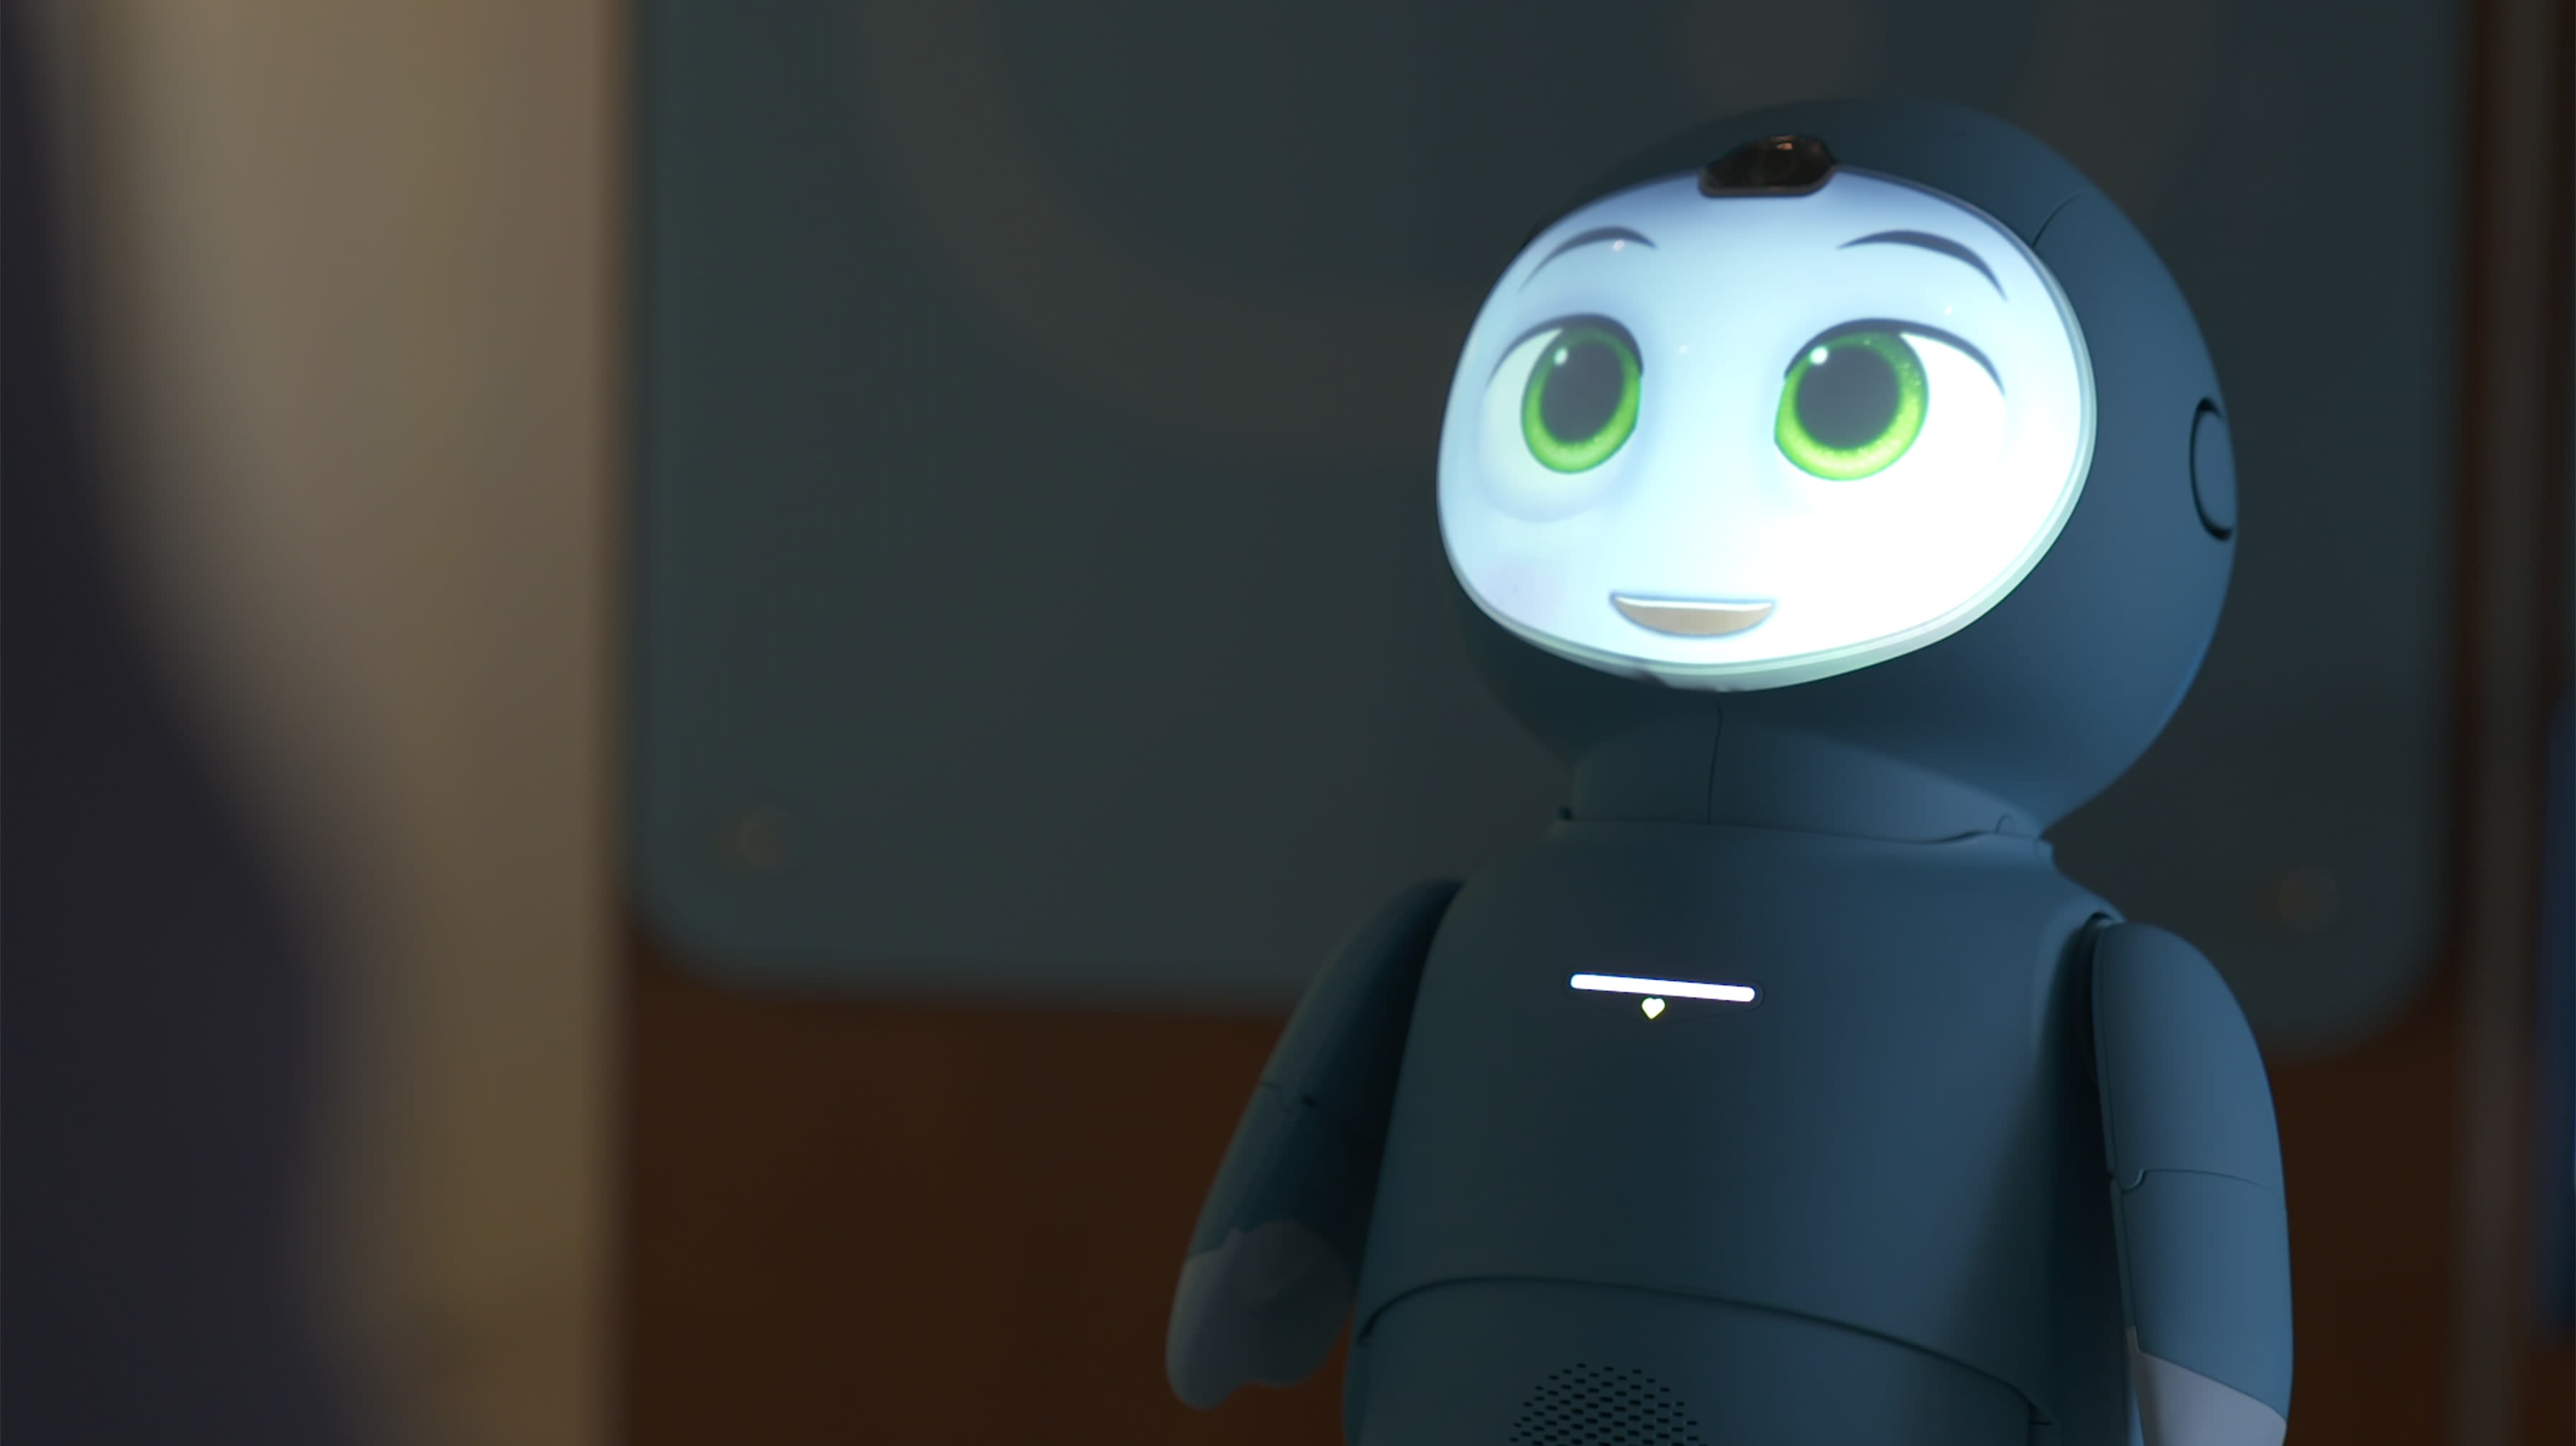 Can a robot ever become your friend?